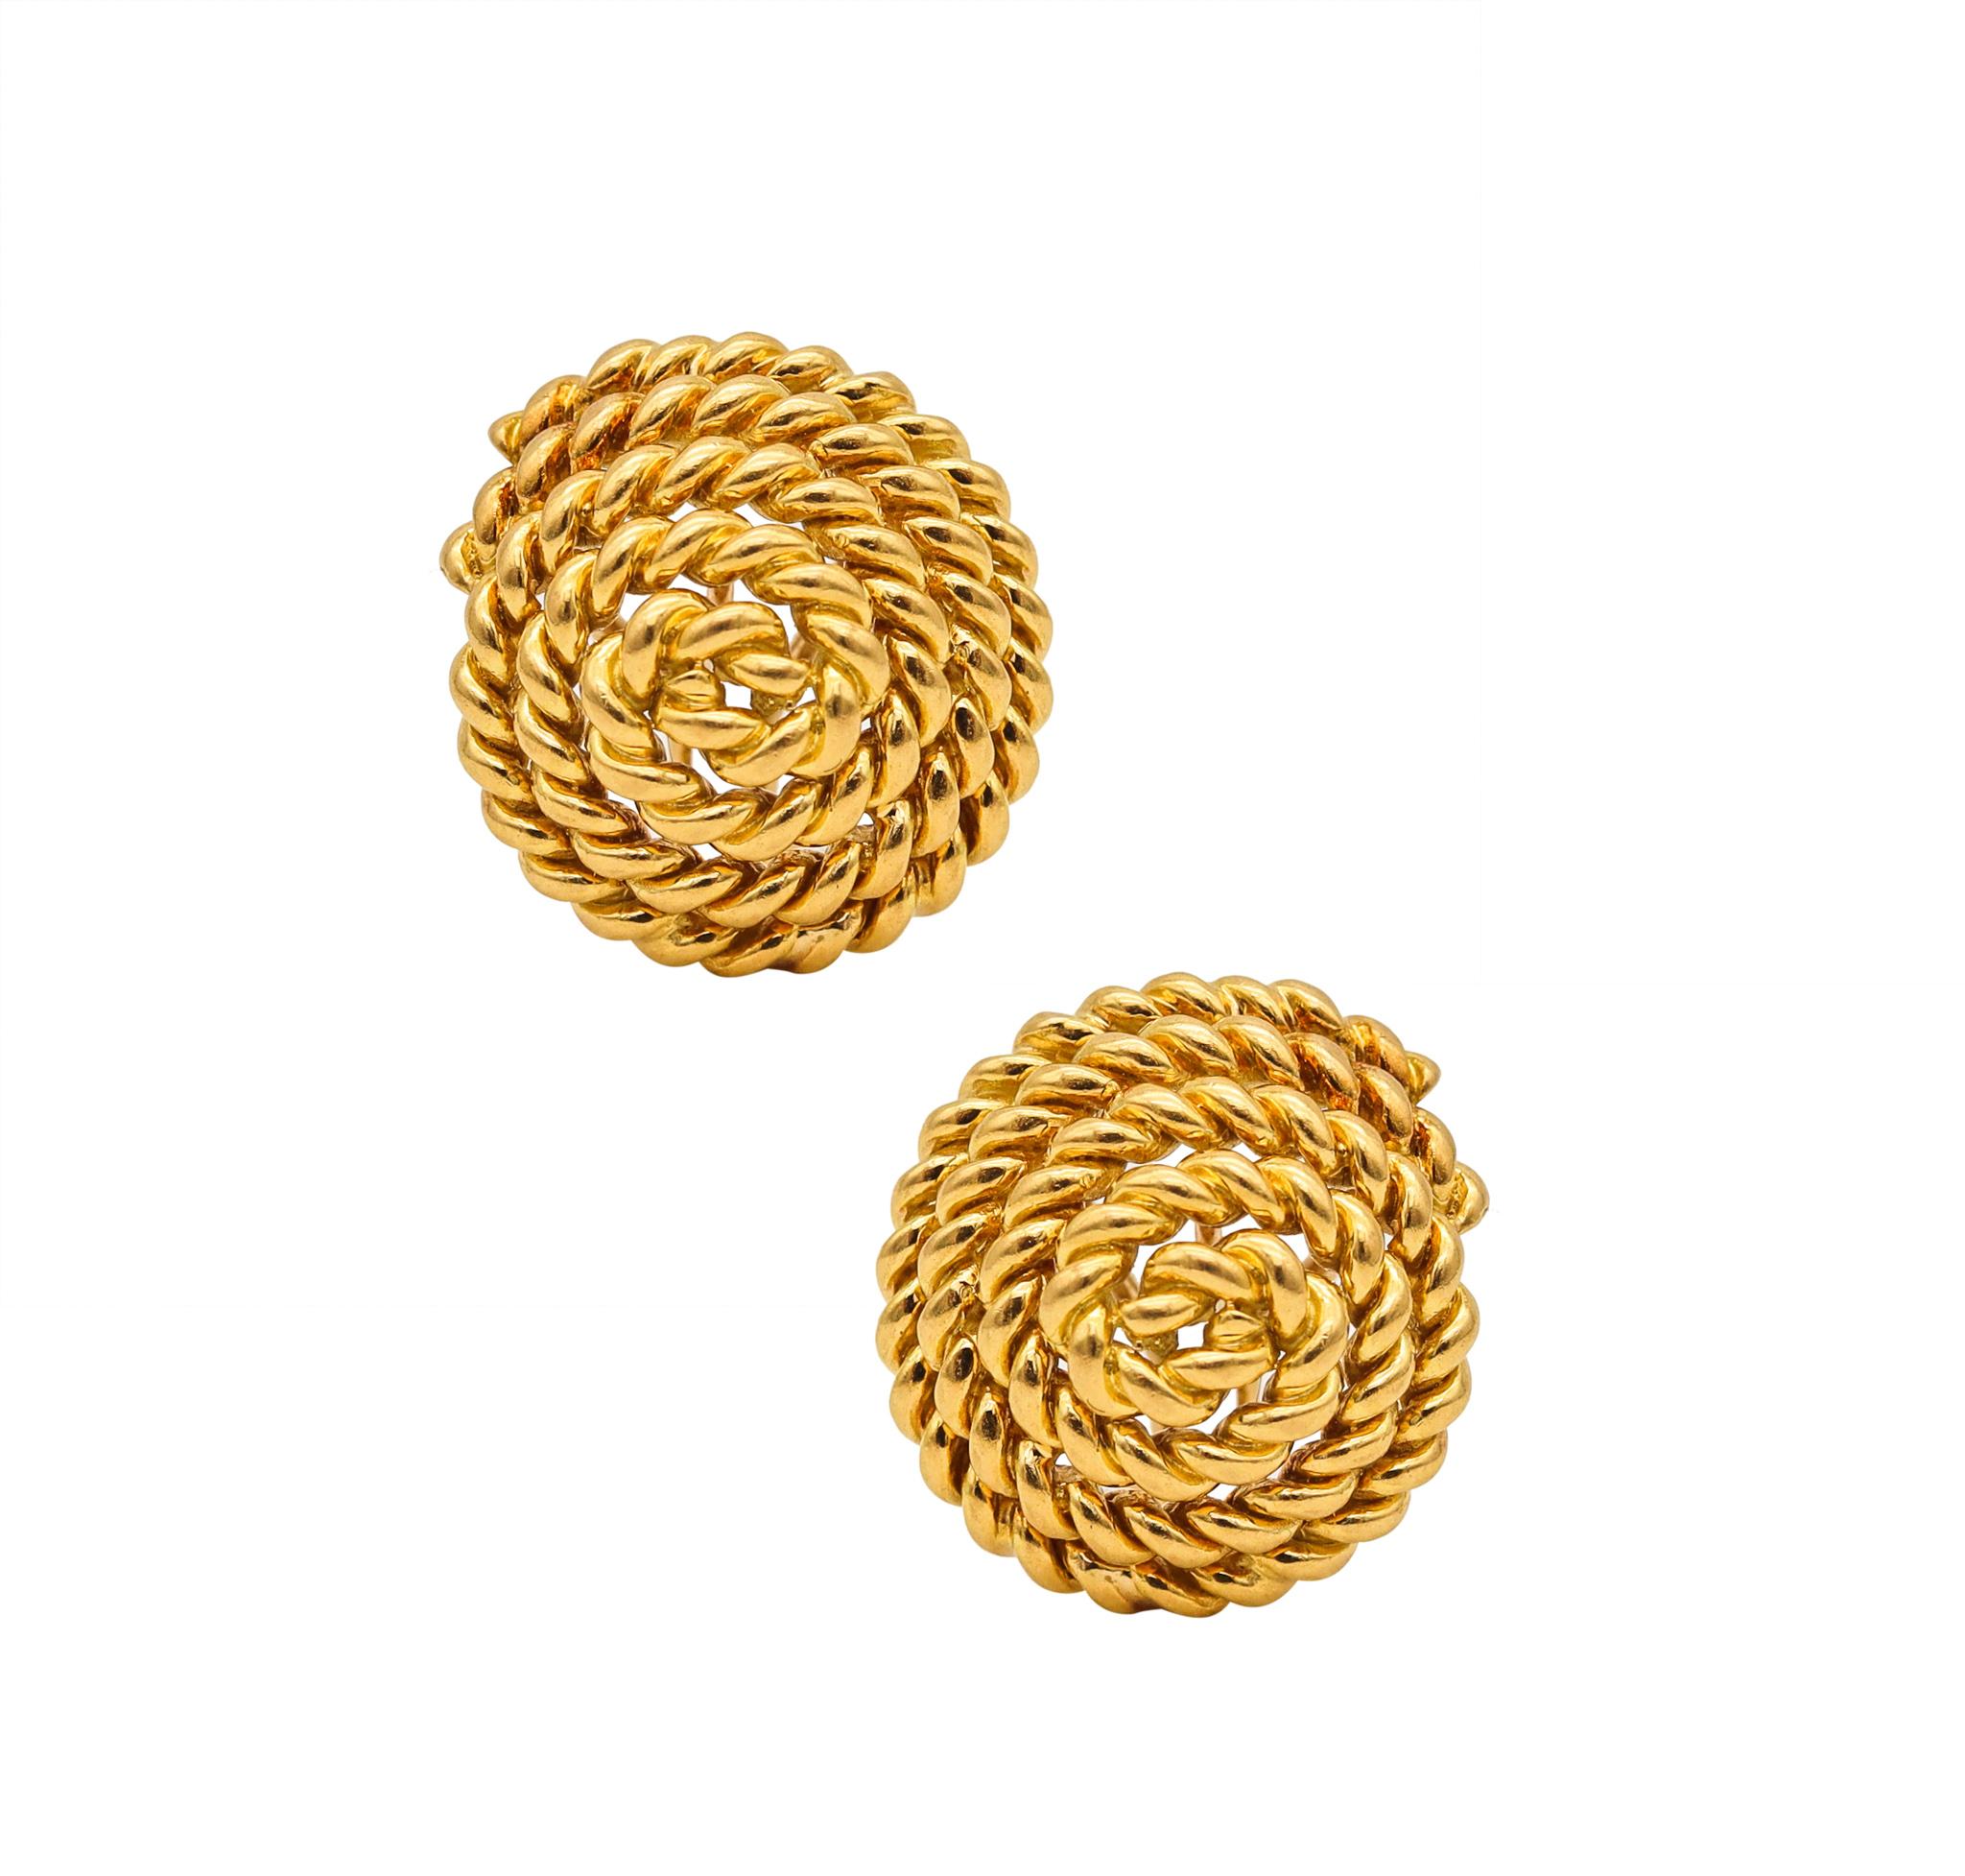 Tiffany & Co. 1985Schlumberger Design Twisted Ropes Earrings In 18Kt YellowGold 2